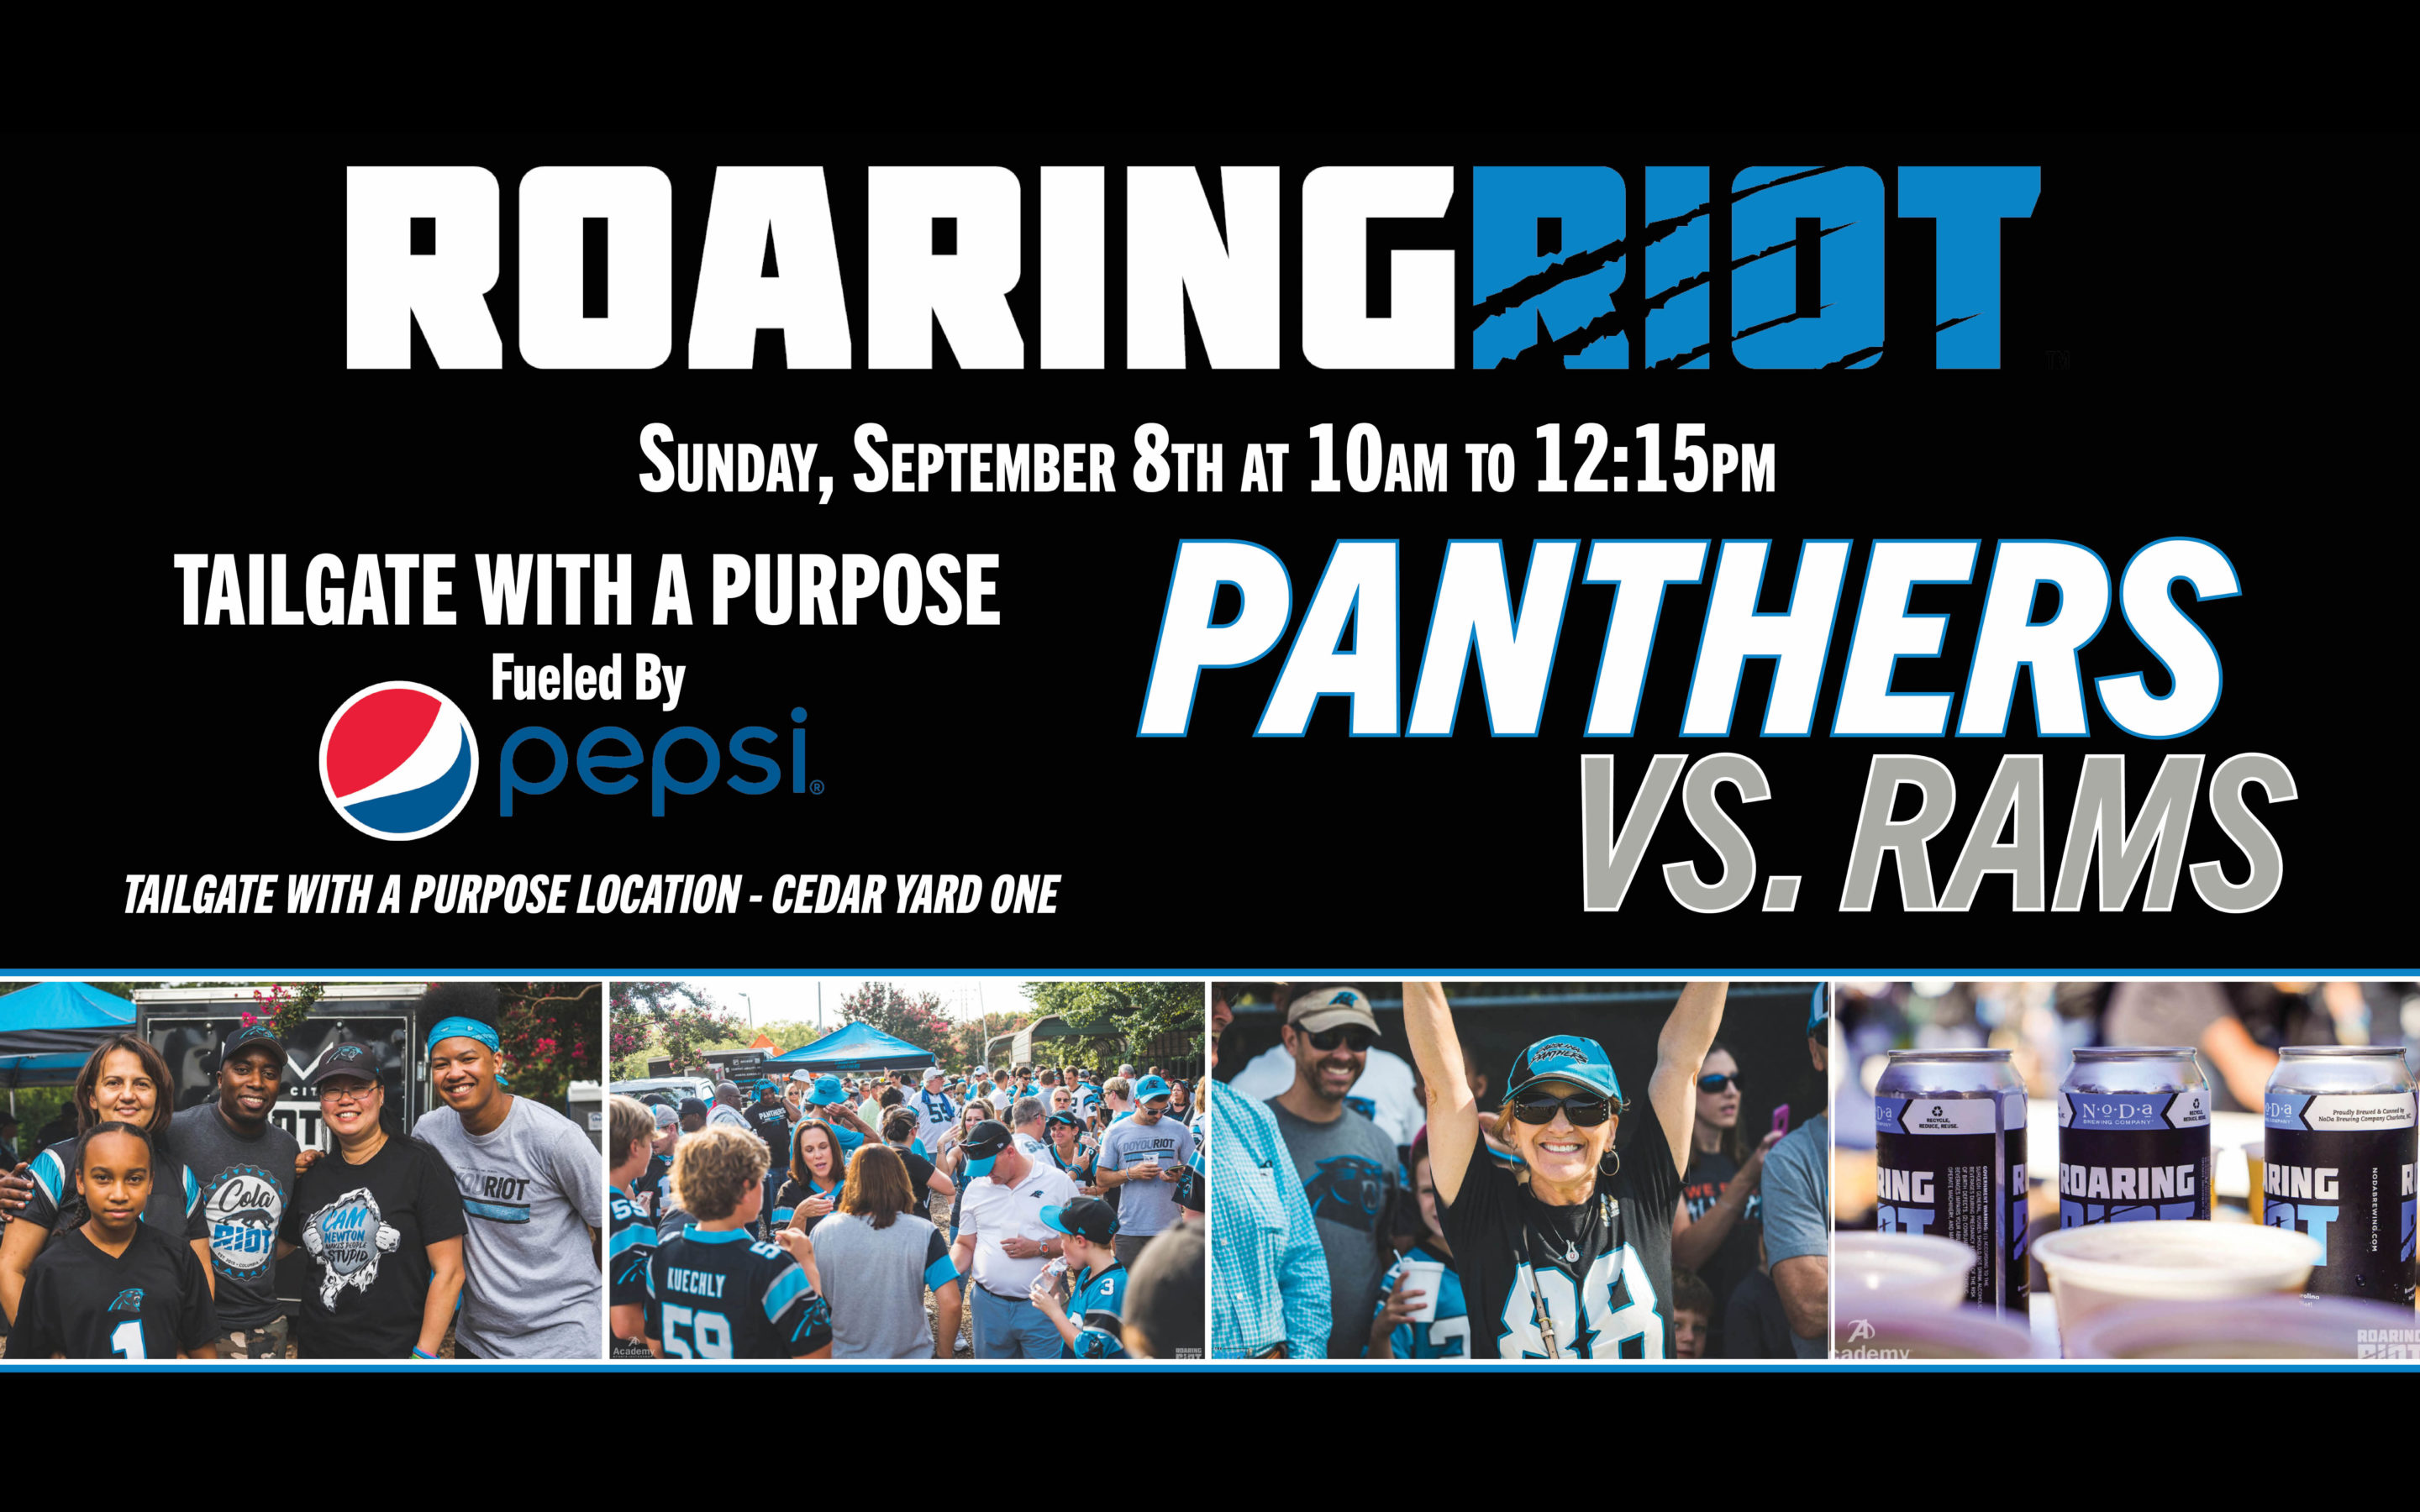 Pepsi Partners With The Roaring Riot To Fuel Tailgate With A Purpose